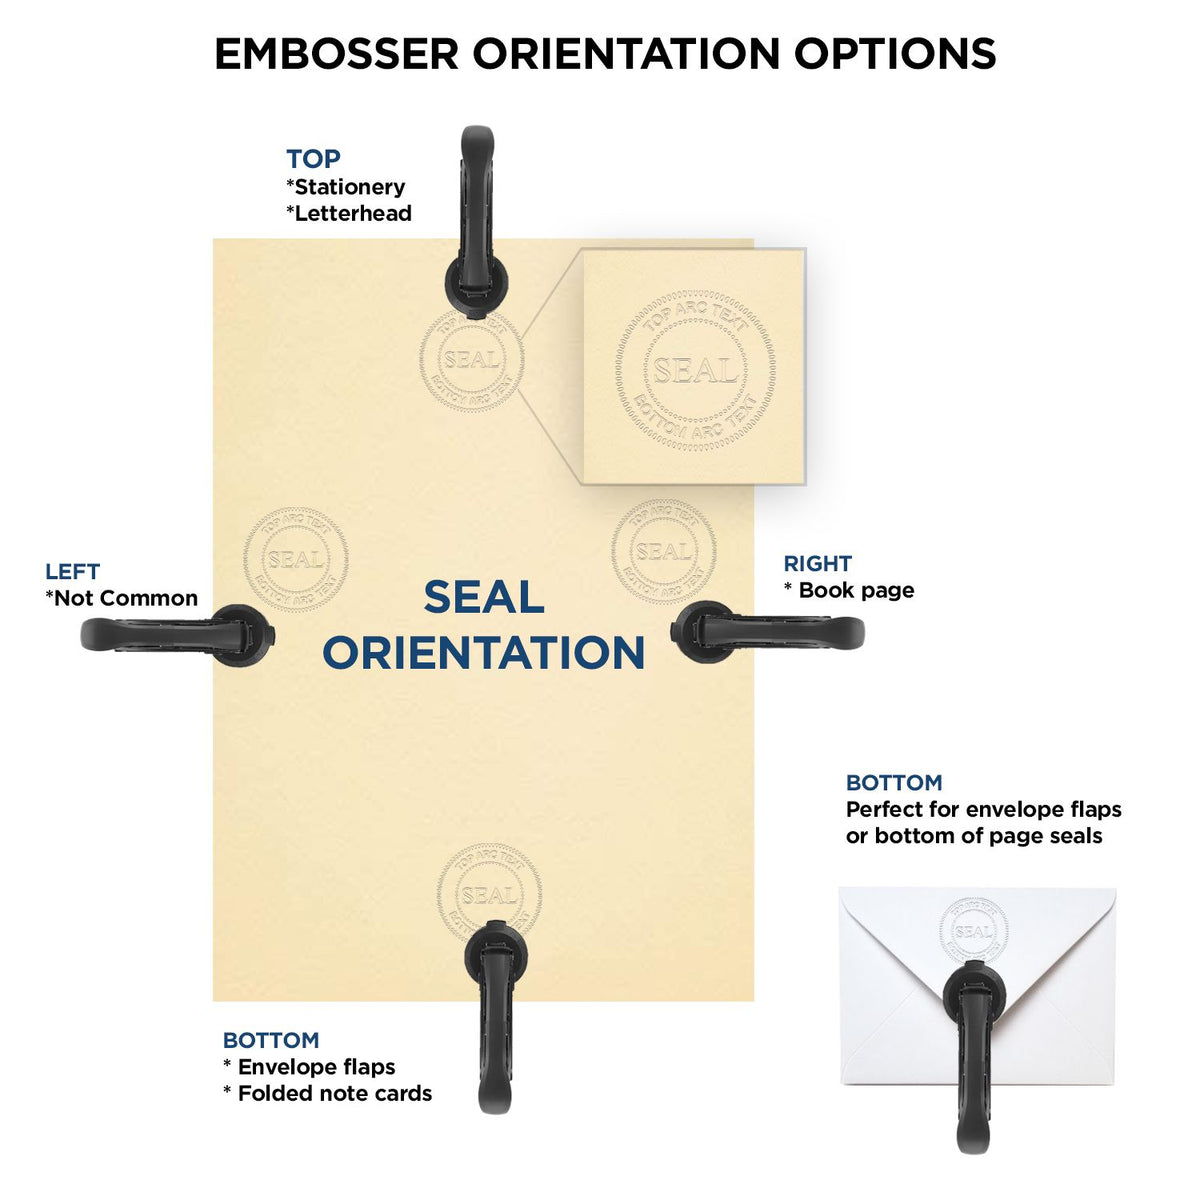 An infographic for the Gift Louisiana Architect Seal showing embosser orientation, this is showing examples of a top, bottom, right and left insert.